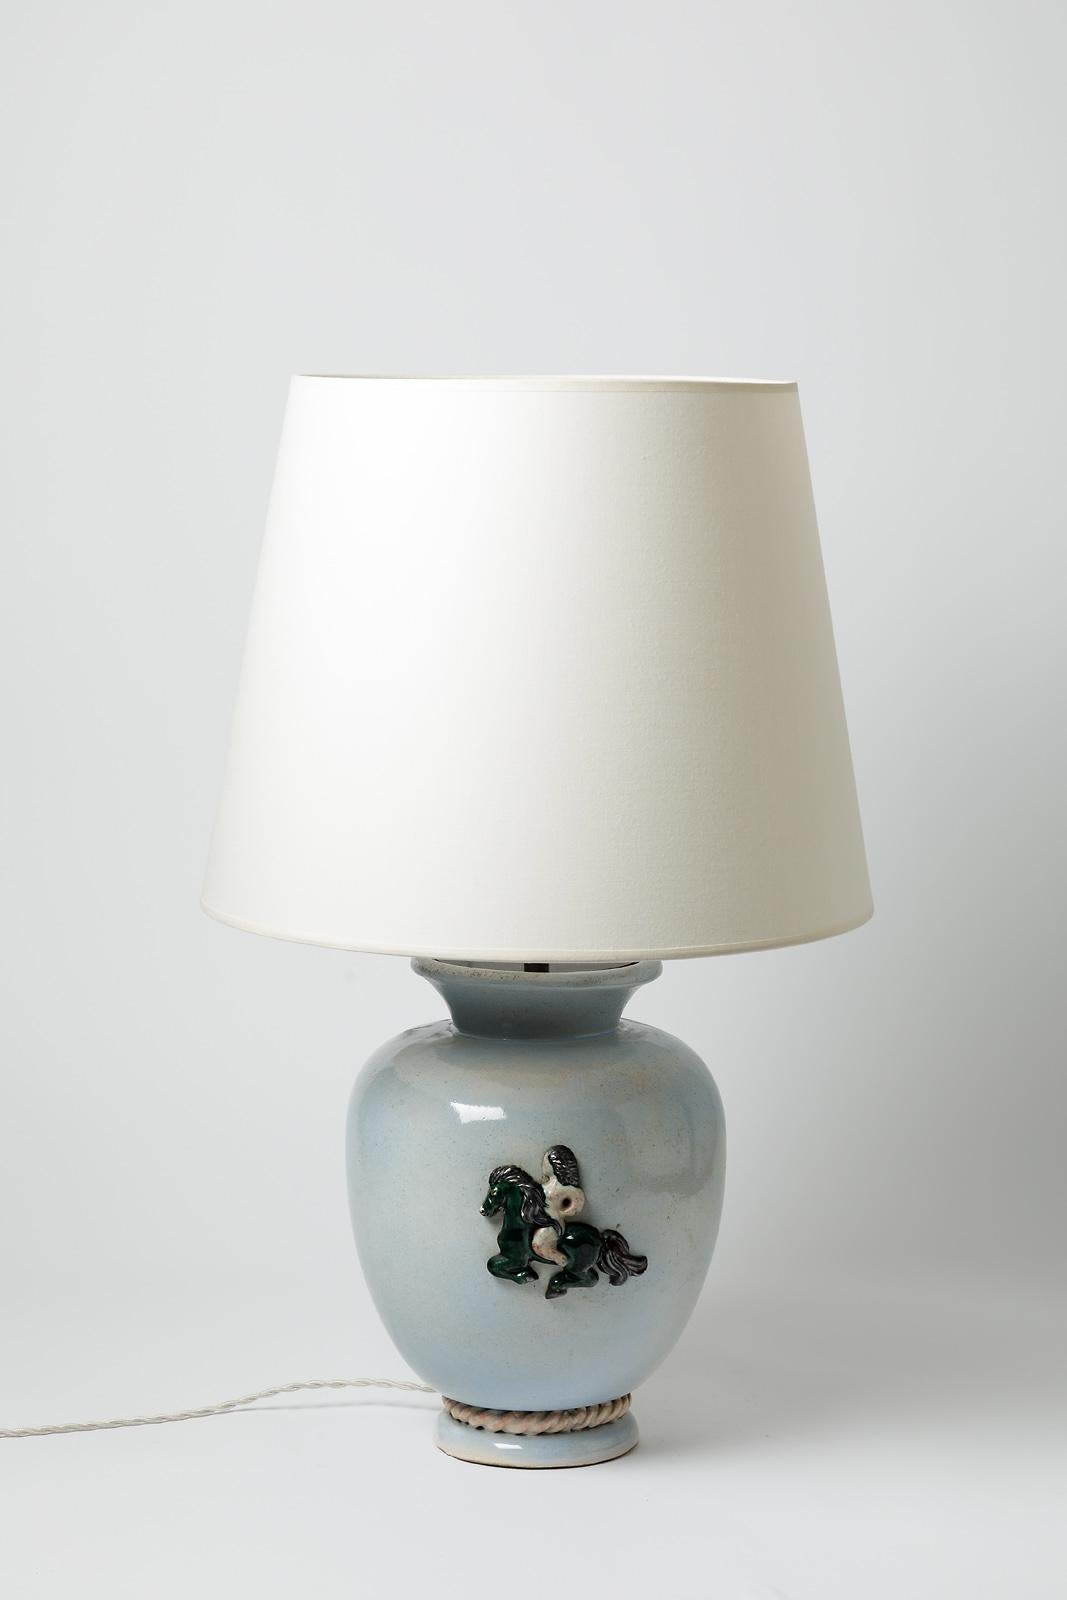 Blue glazed ceramic table lamp by Pol Pouchol. 
Sold with a new lamp shade and a new european electrical system
Perfect original conditions.
Stamp signature under the base like a sun.
Circa 1940-1950.

Dimensions :
- Ceramic only : 30 x 22 cm / 11.8